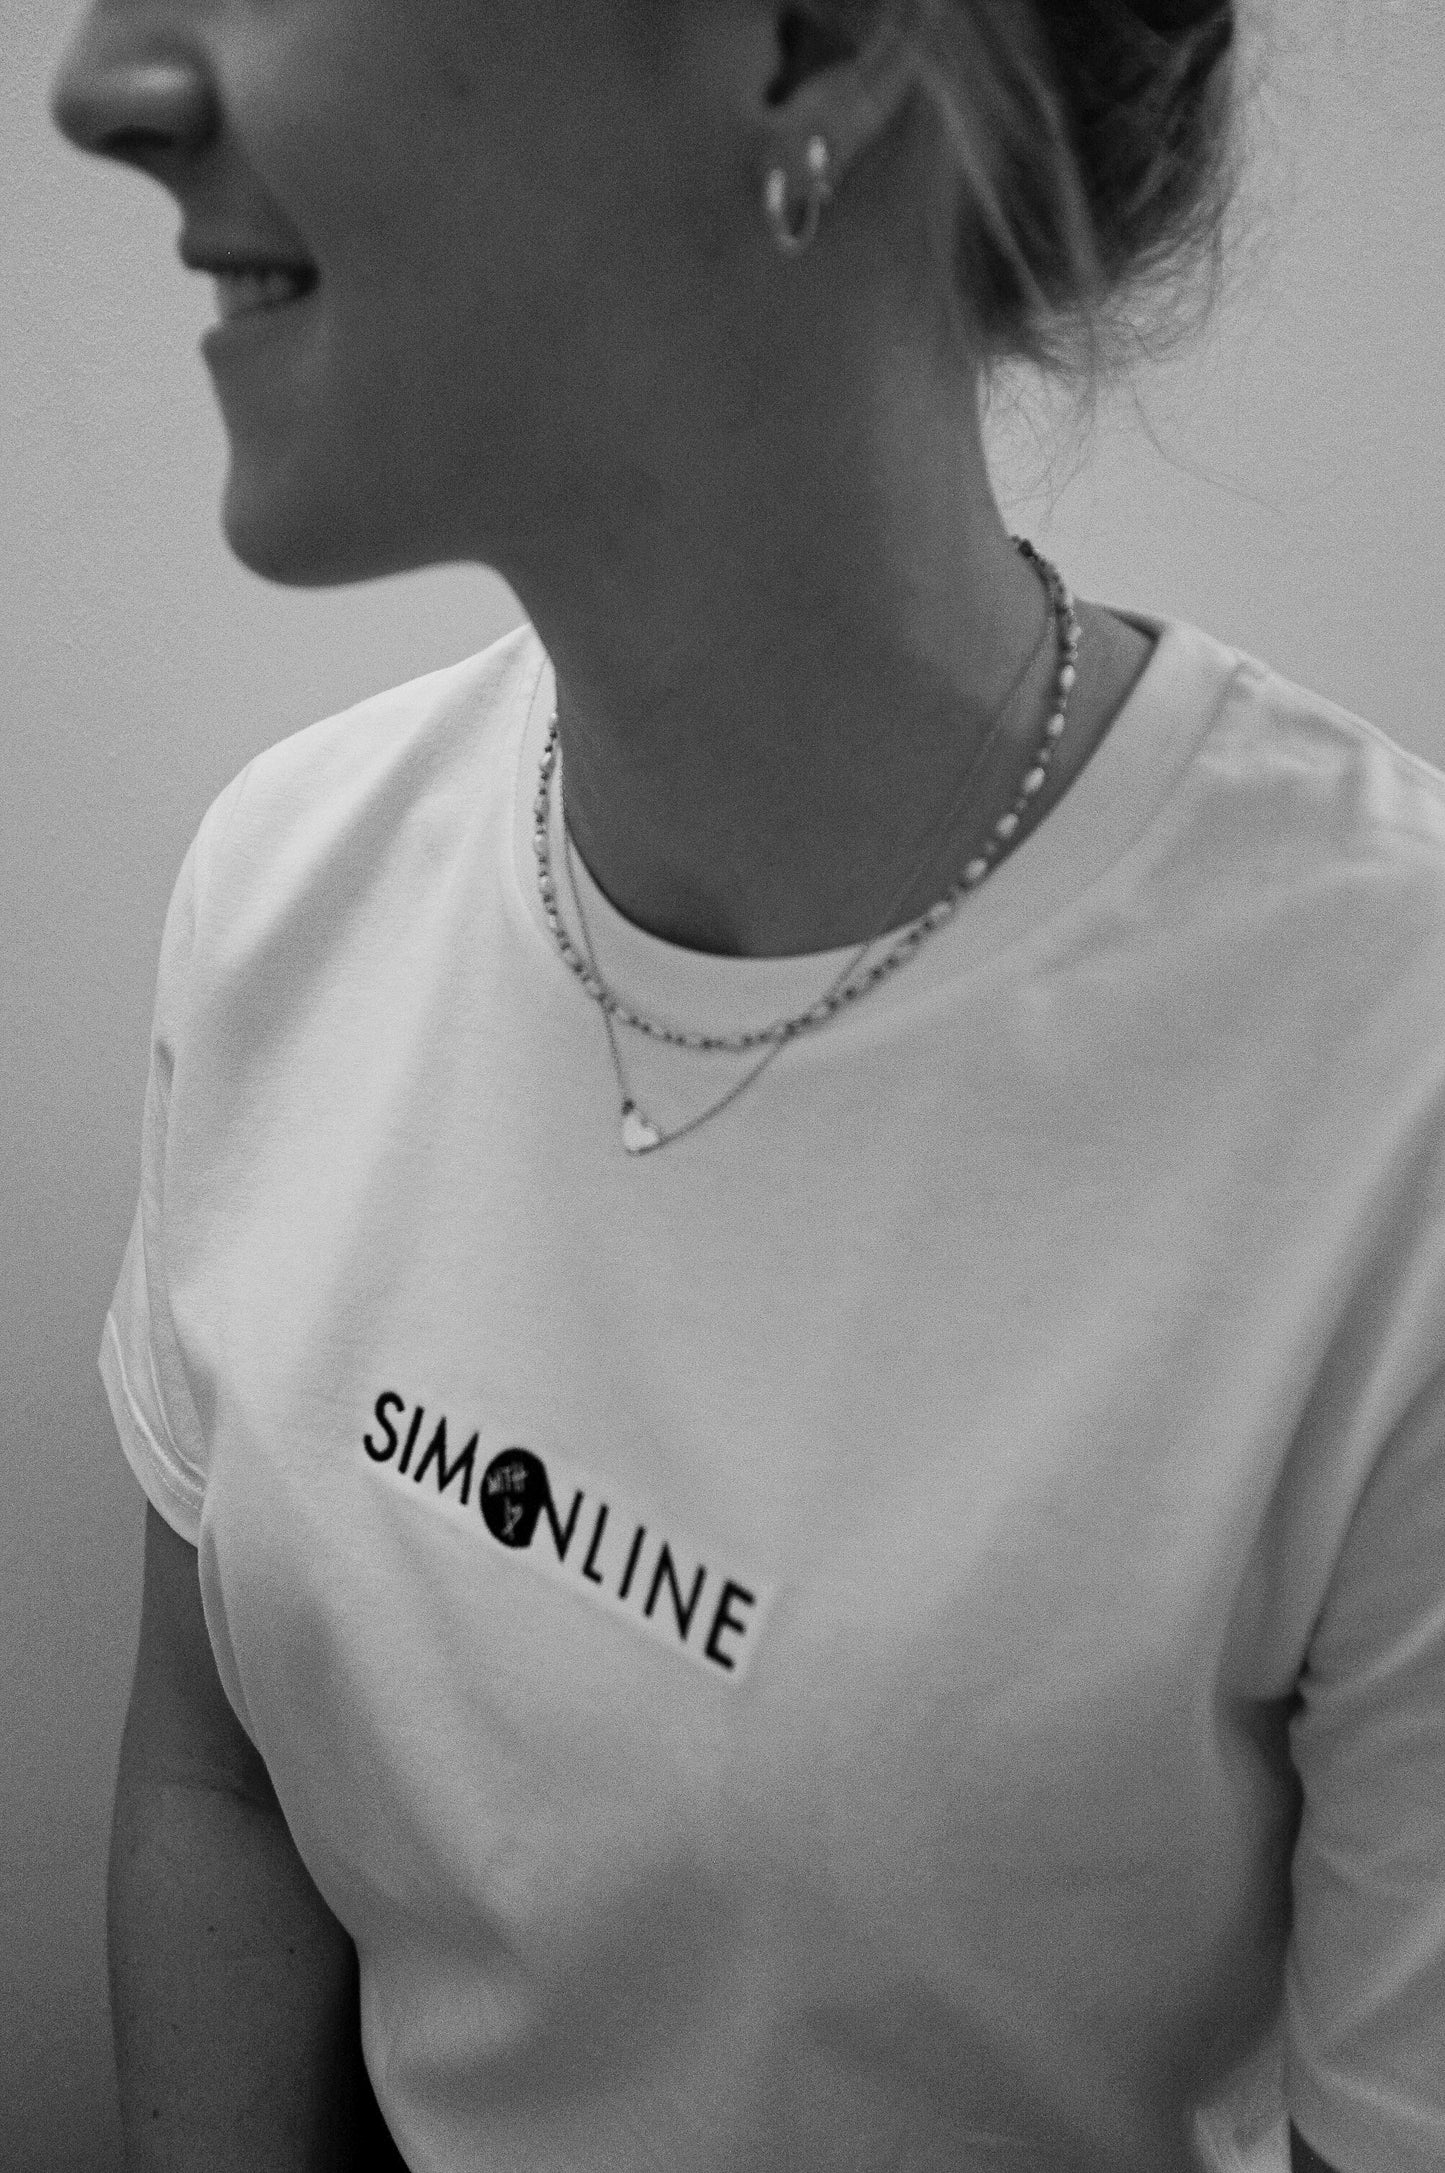 SIMONLINE WITH LOVE T-SHIRT